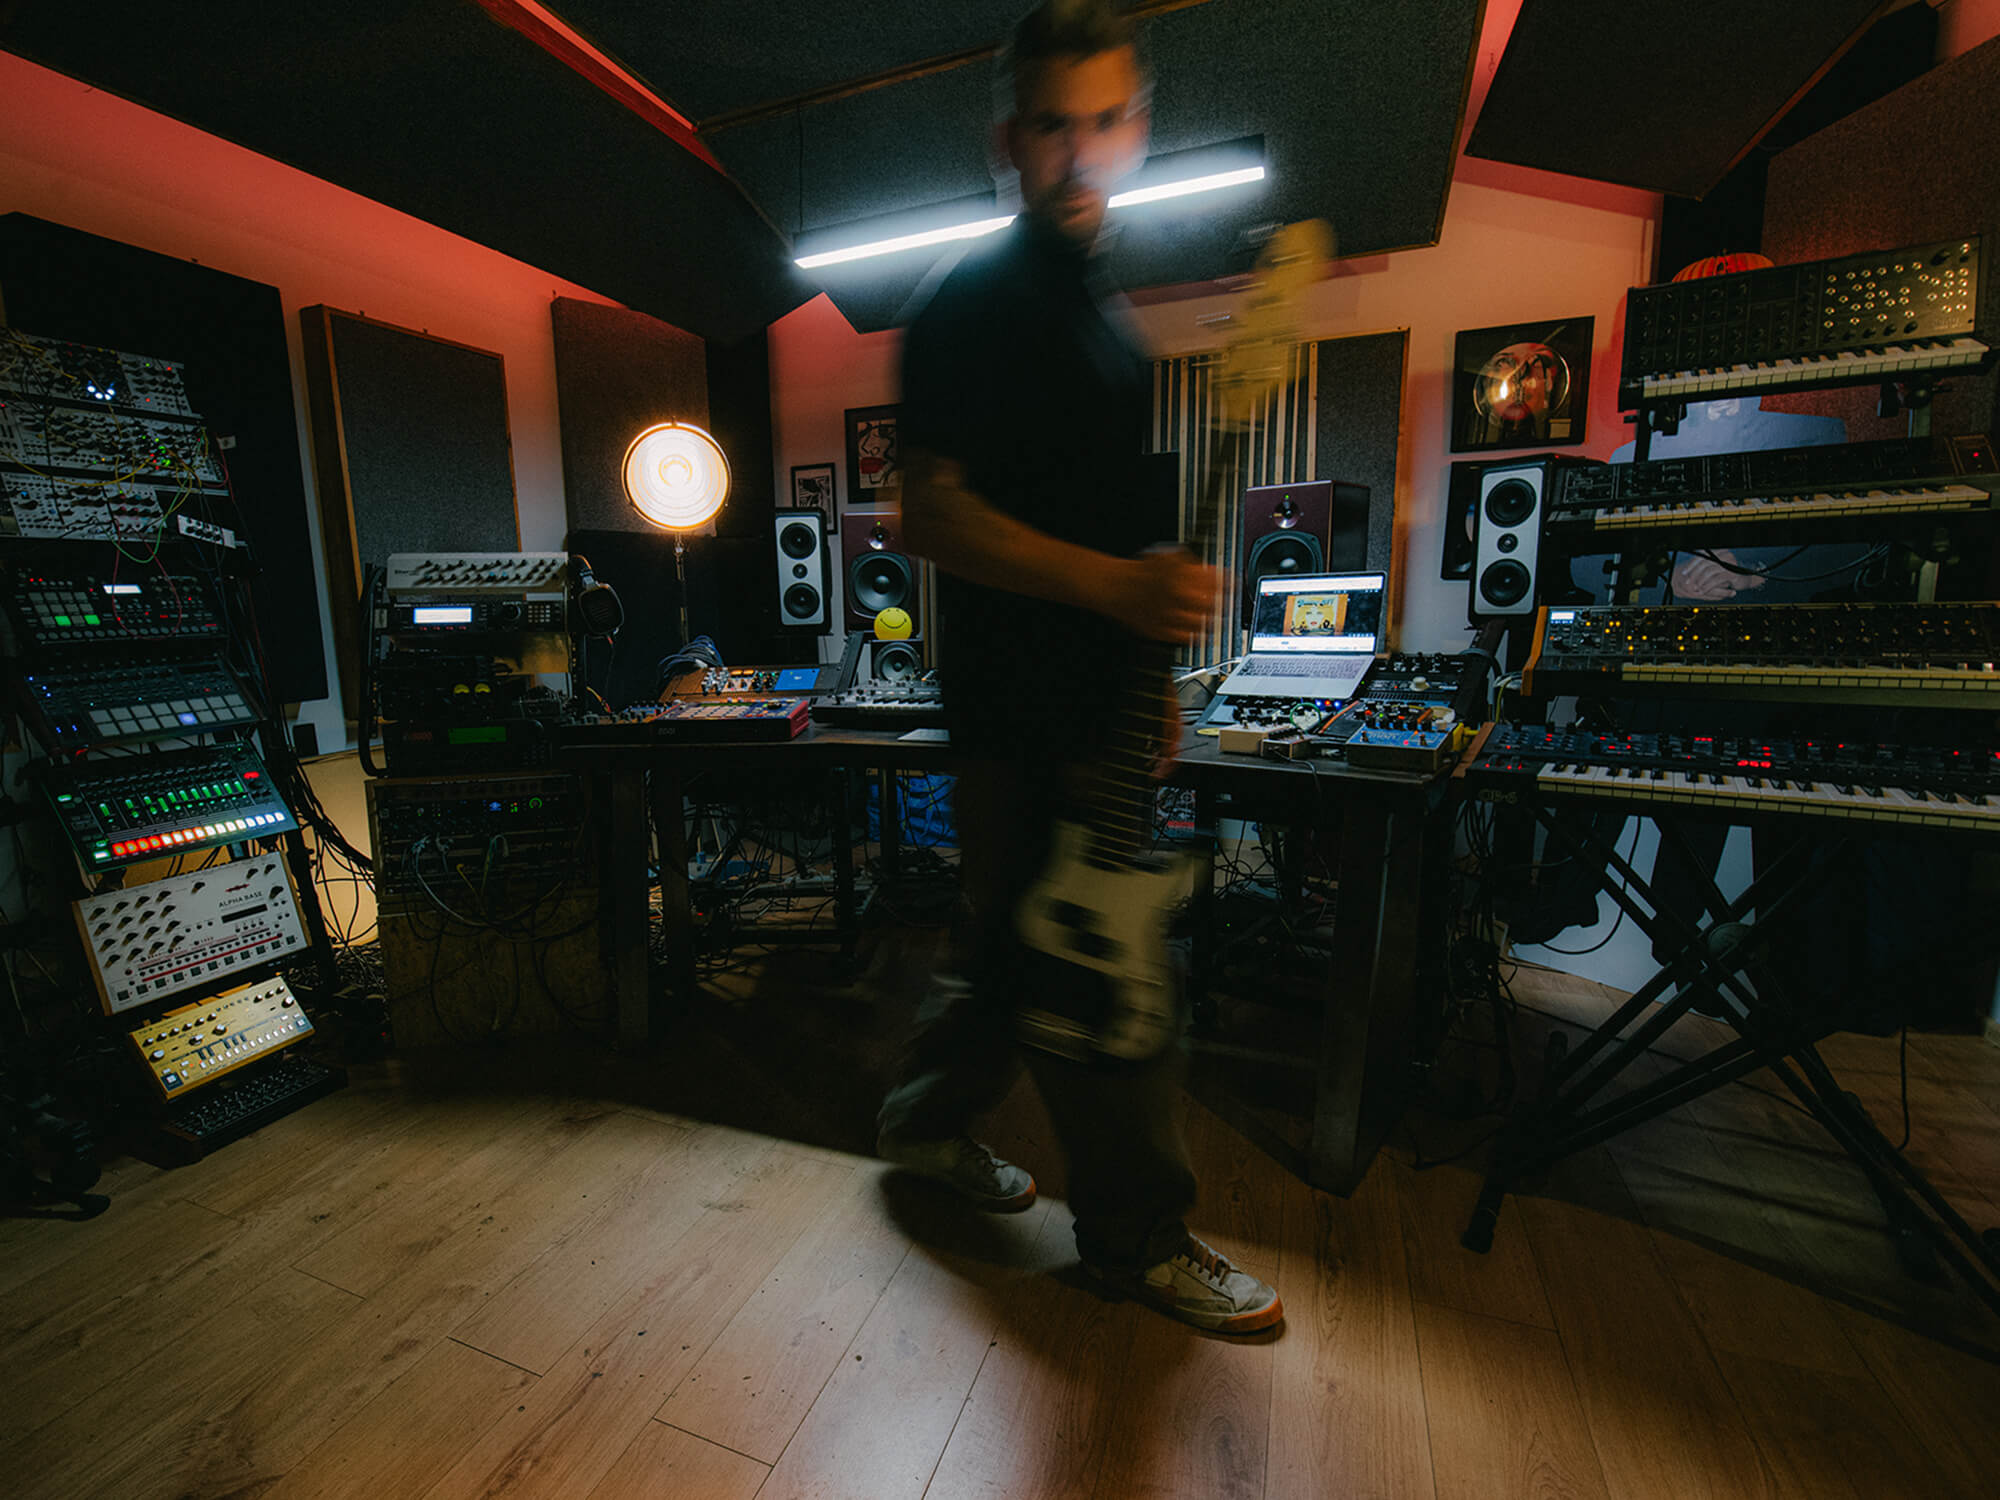 Voigtmann in the studio he shares with Tom Demac by @Ginnypa